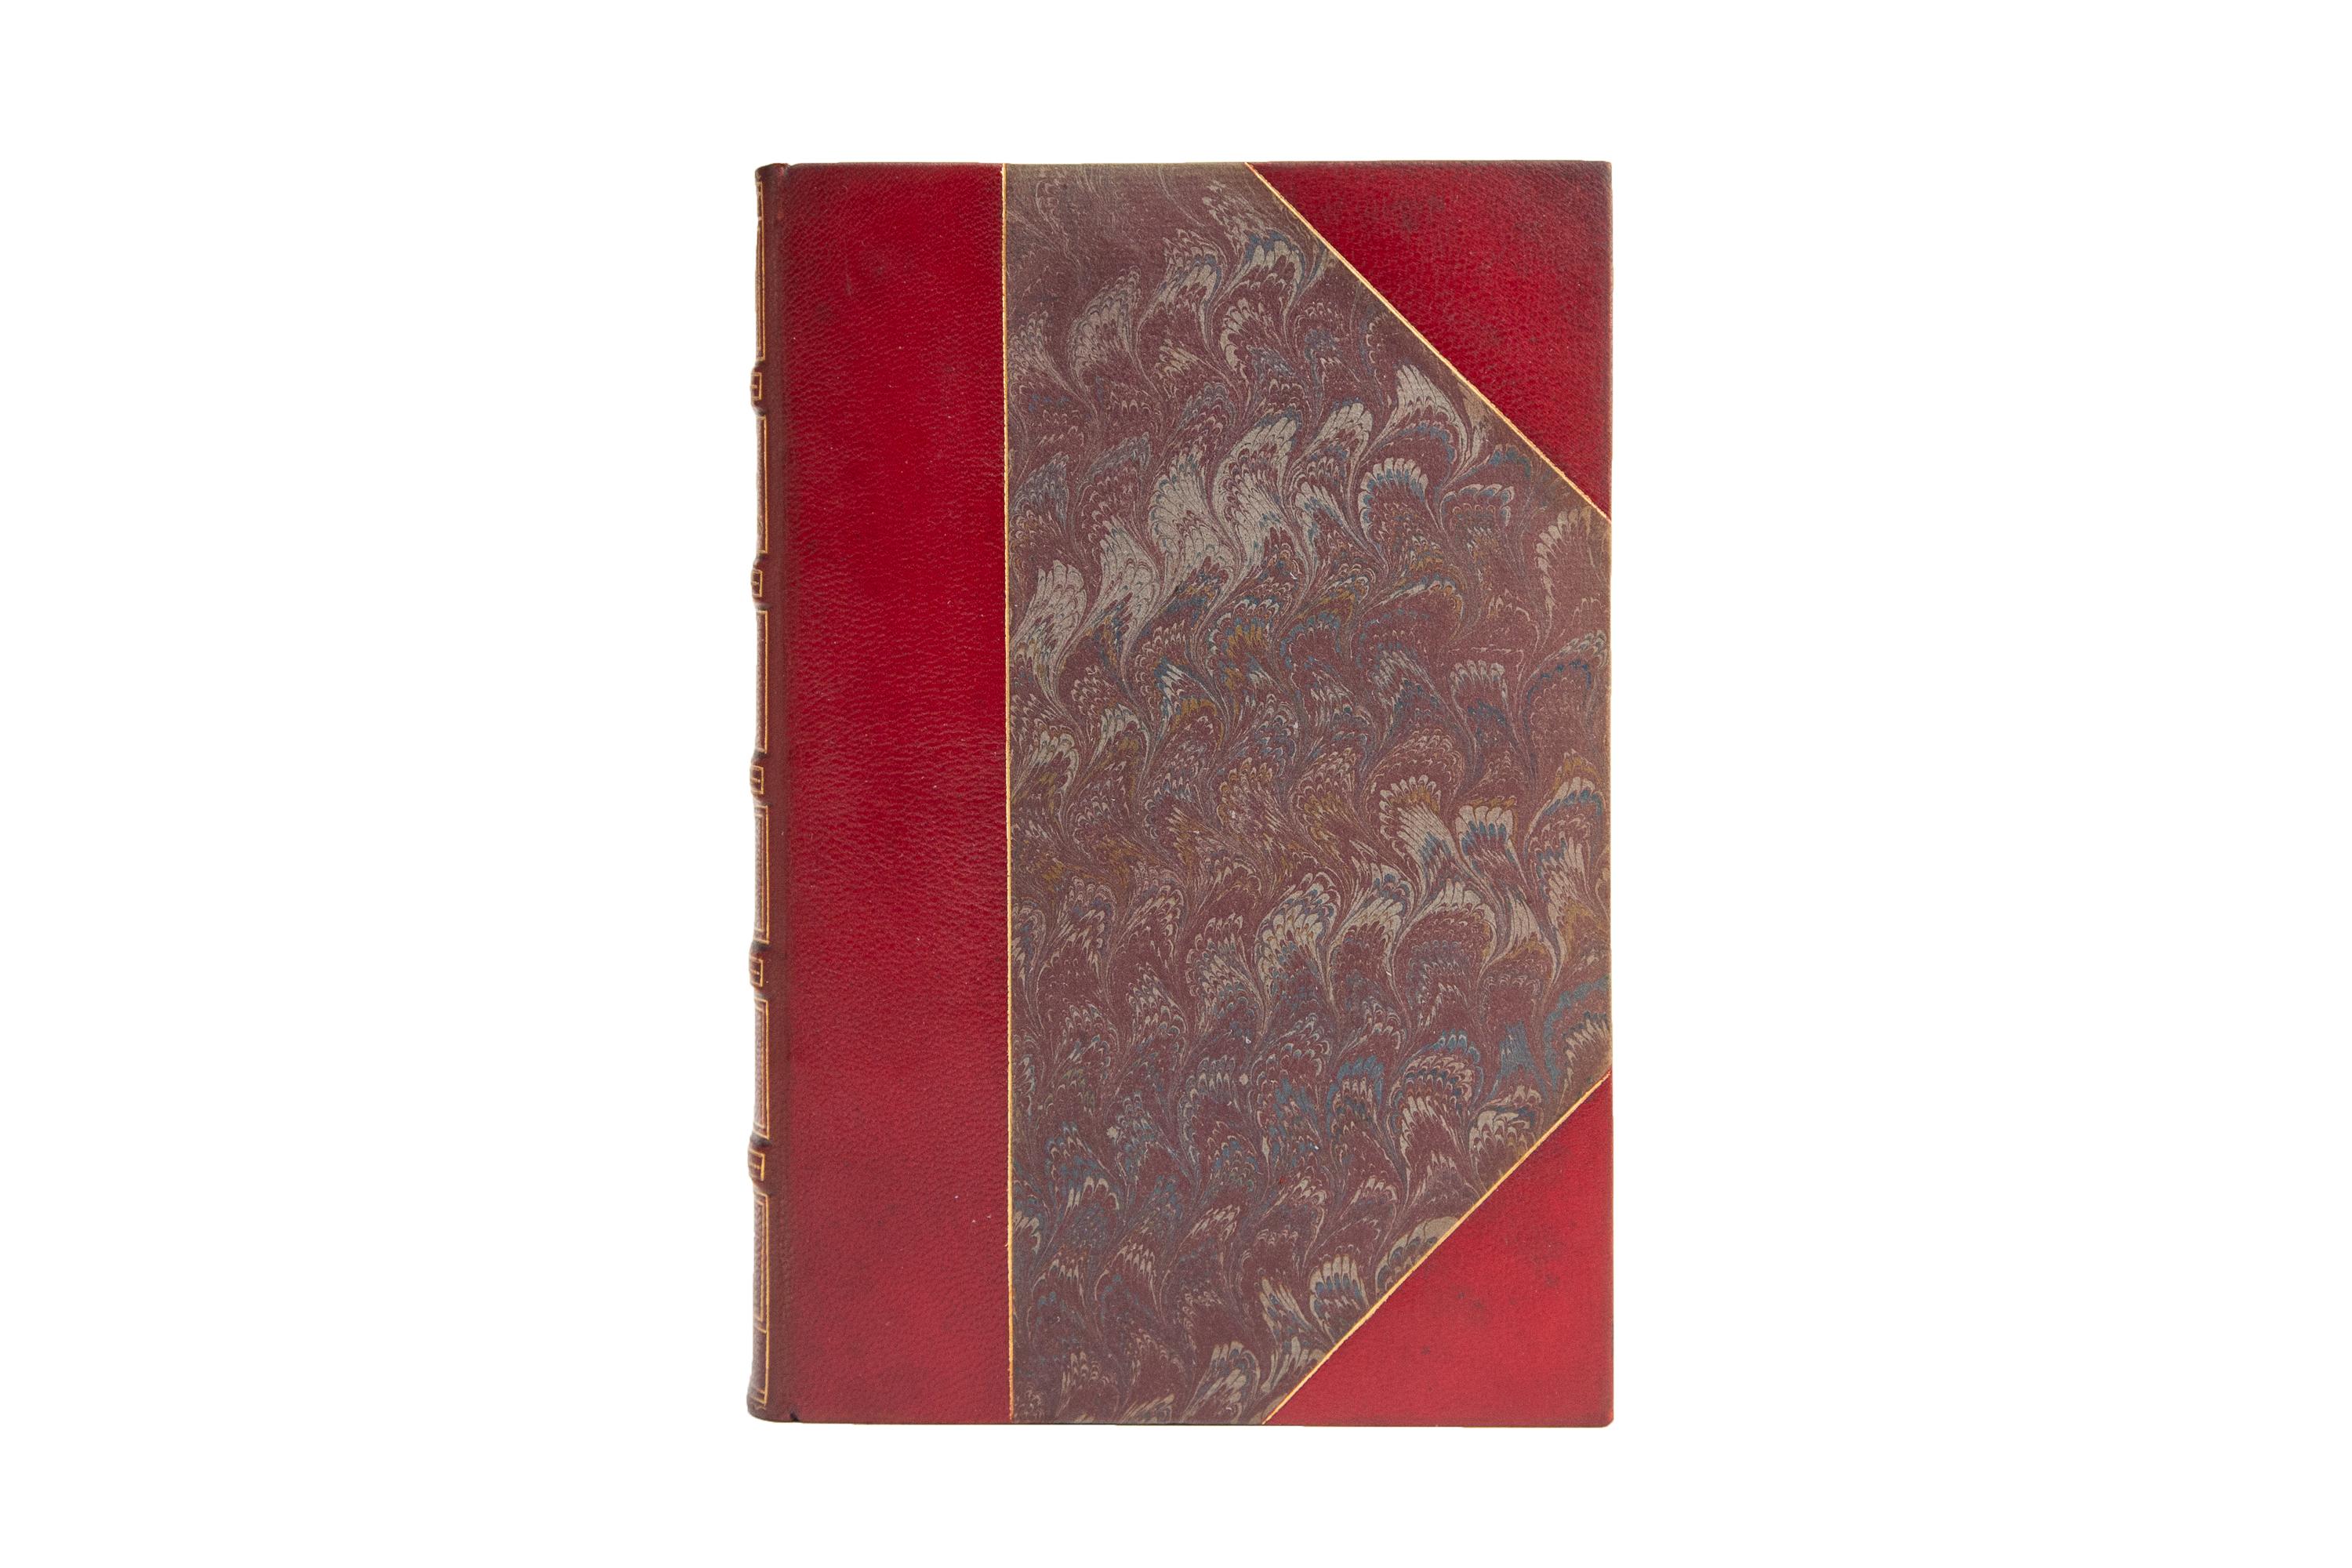 8 Volumes. John Bach McMaster, A History of the People of the United States from the Revolution to the Civil War. Bound in 3/4 red morocco and marbled boards, bordered in gilt. Raised bands gilt with panels displaying gilt bordering and label